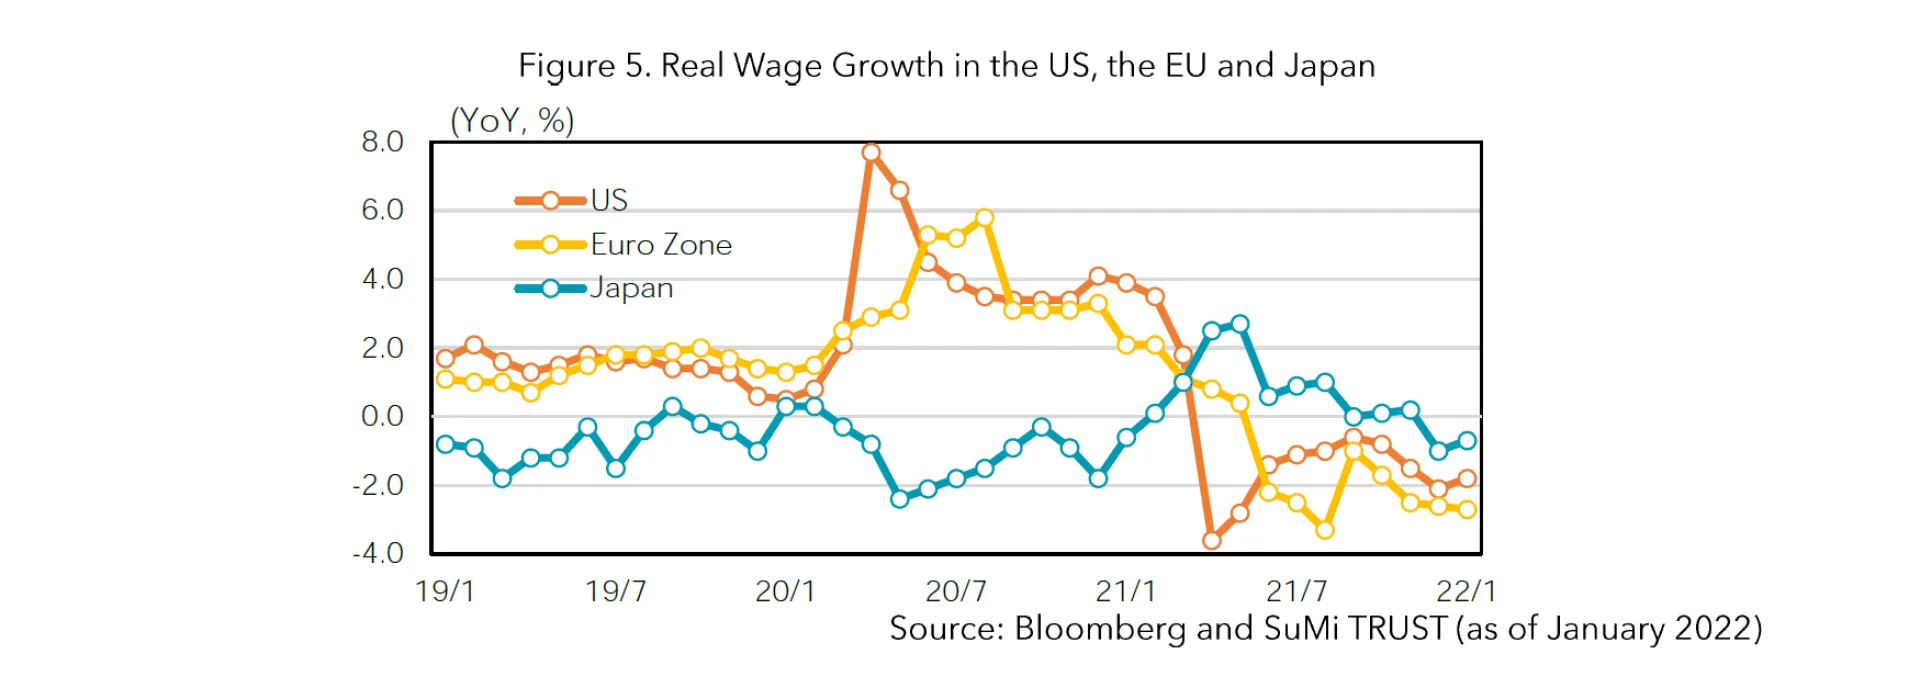 Figure 5 Real Wage Growth in the US, the EU and Japan